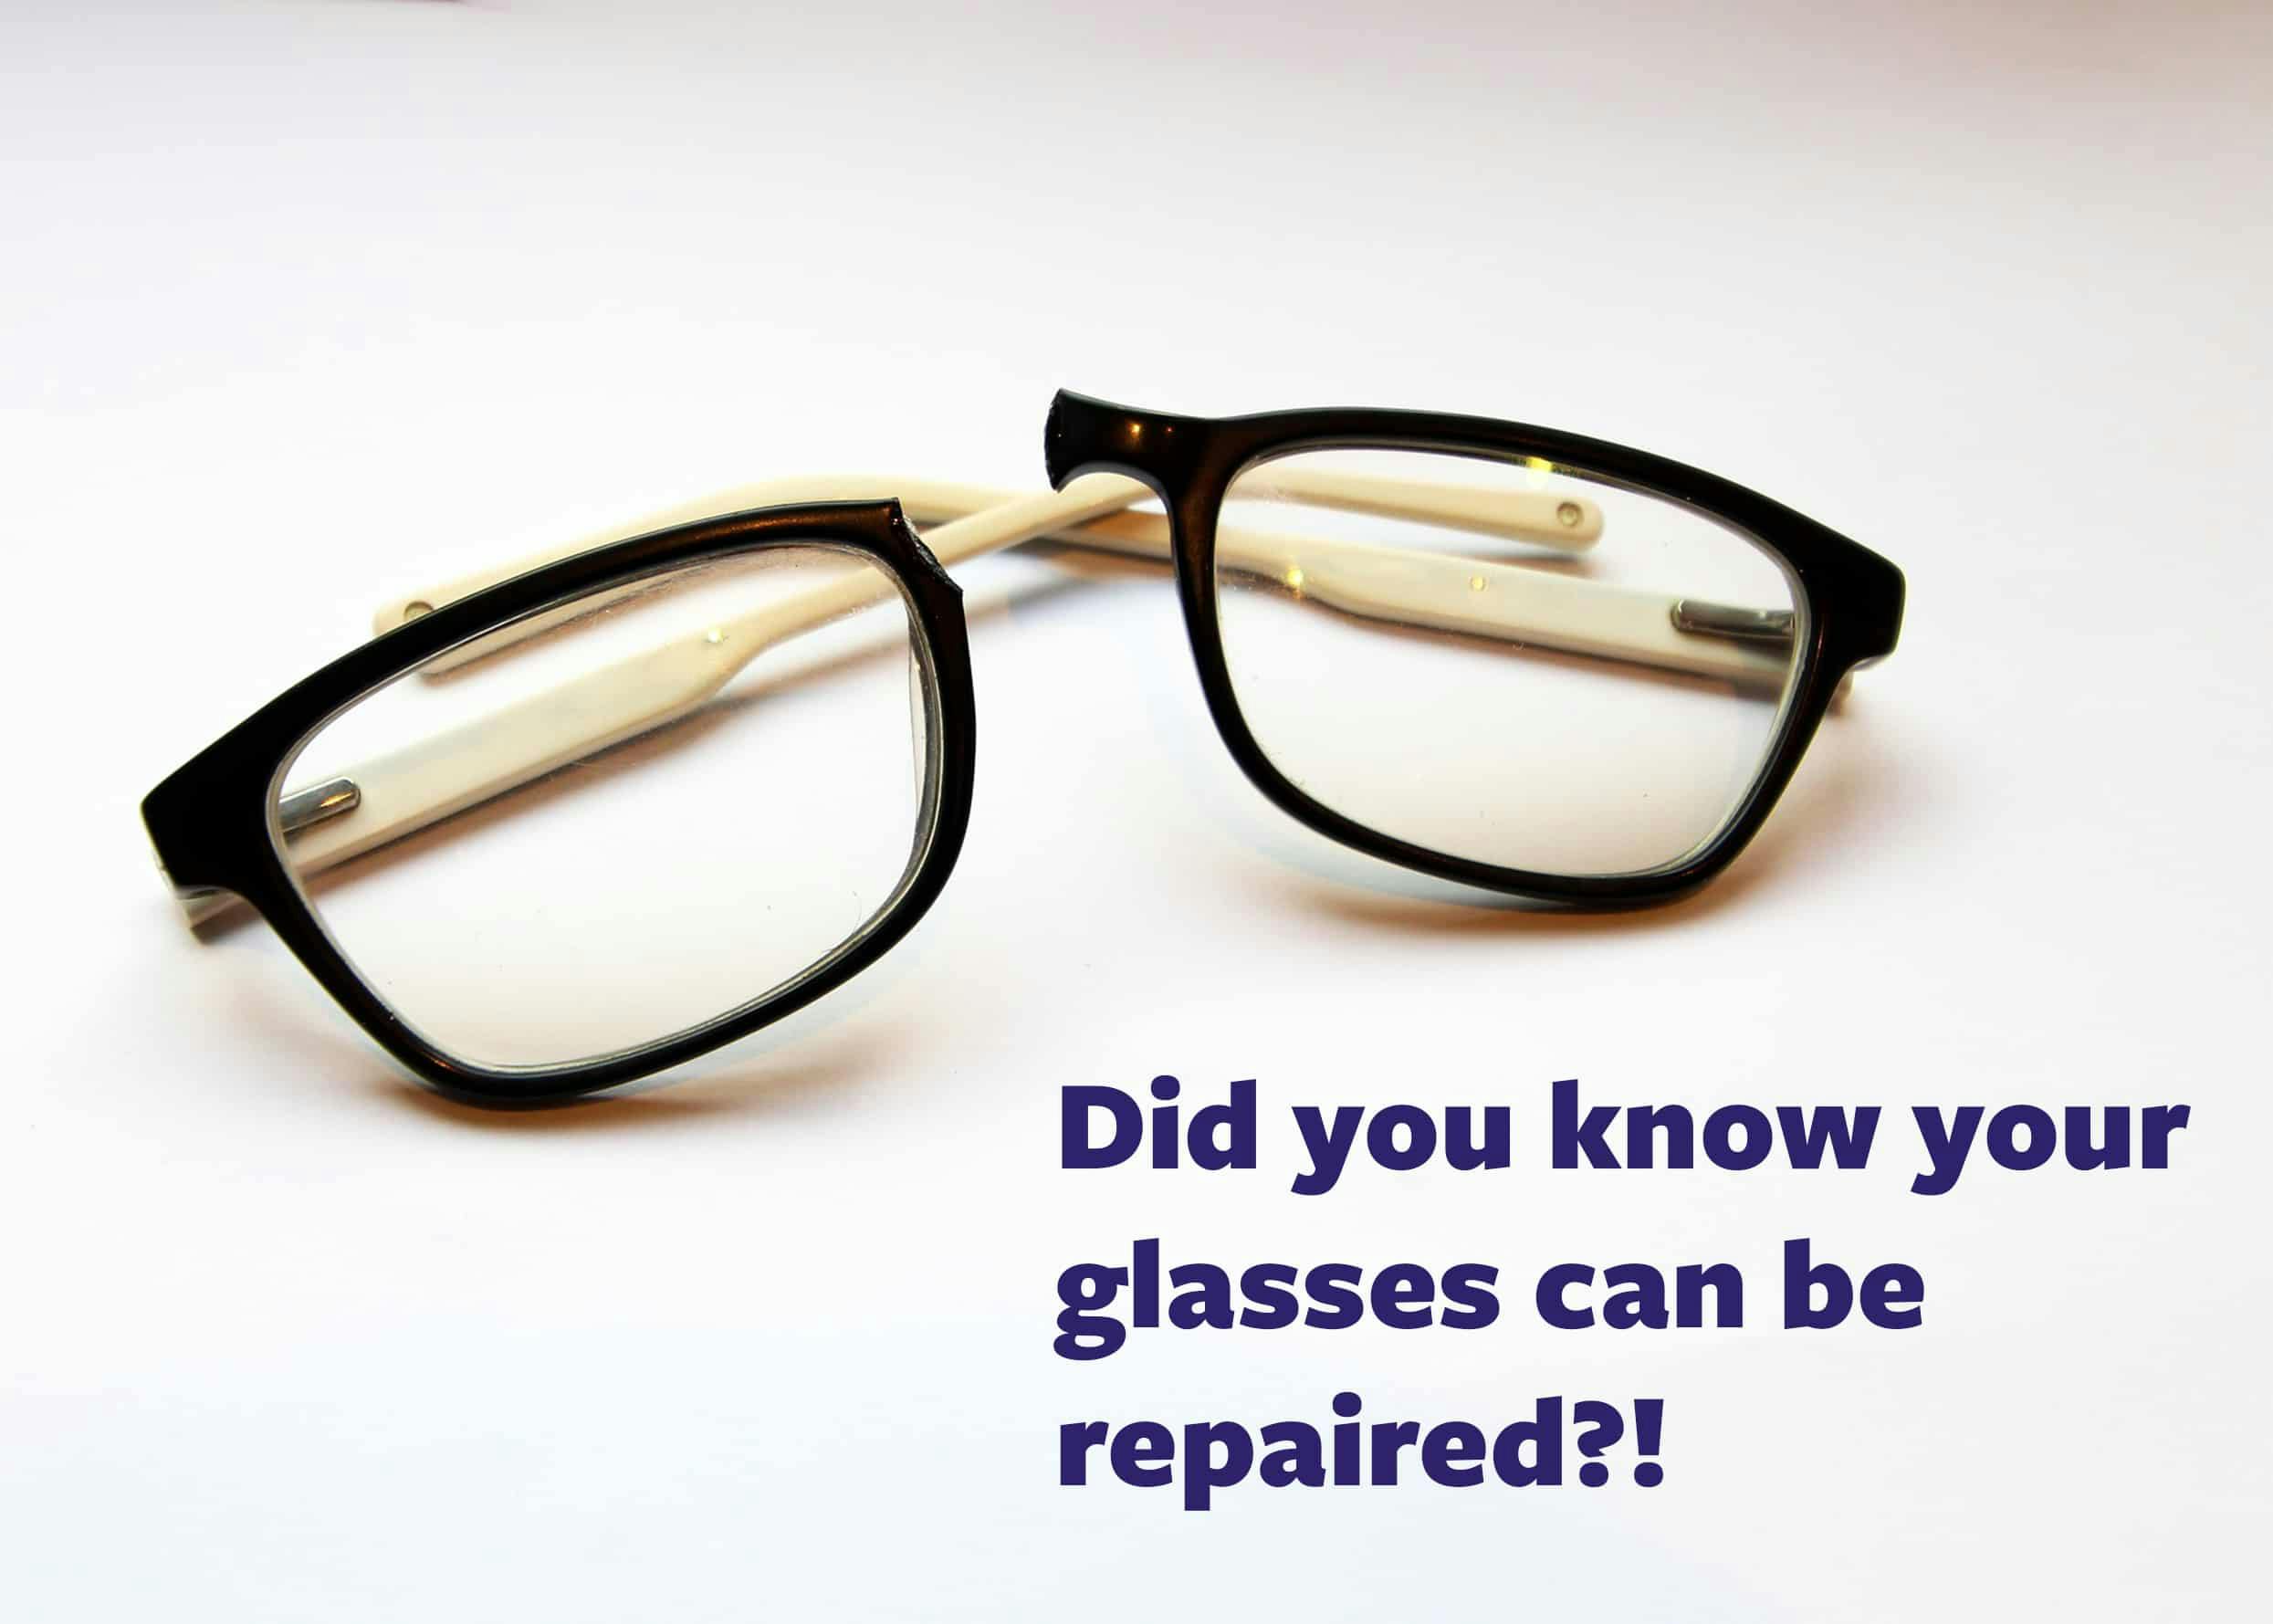 broken glasses - did you know they can be repaired